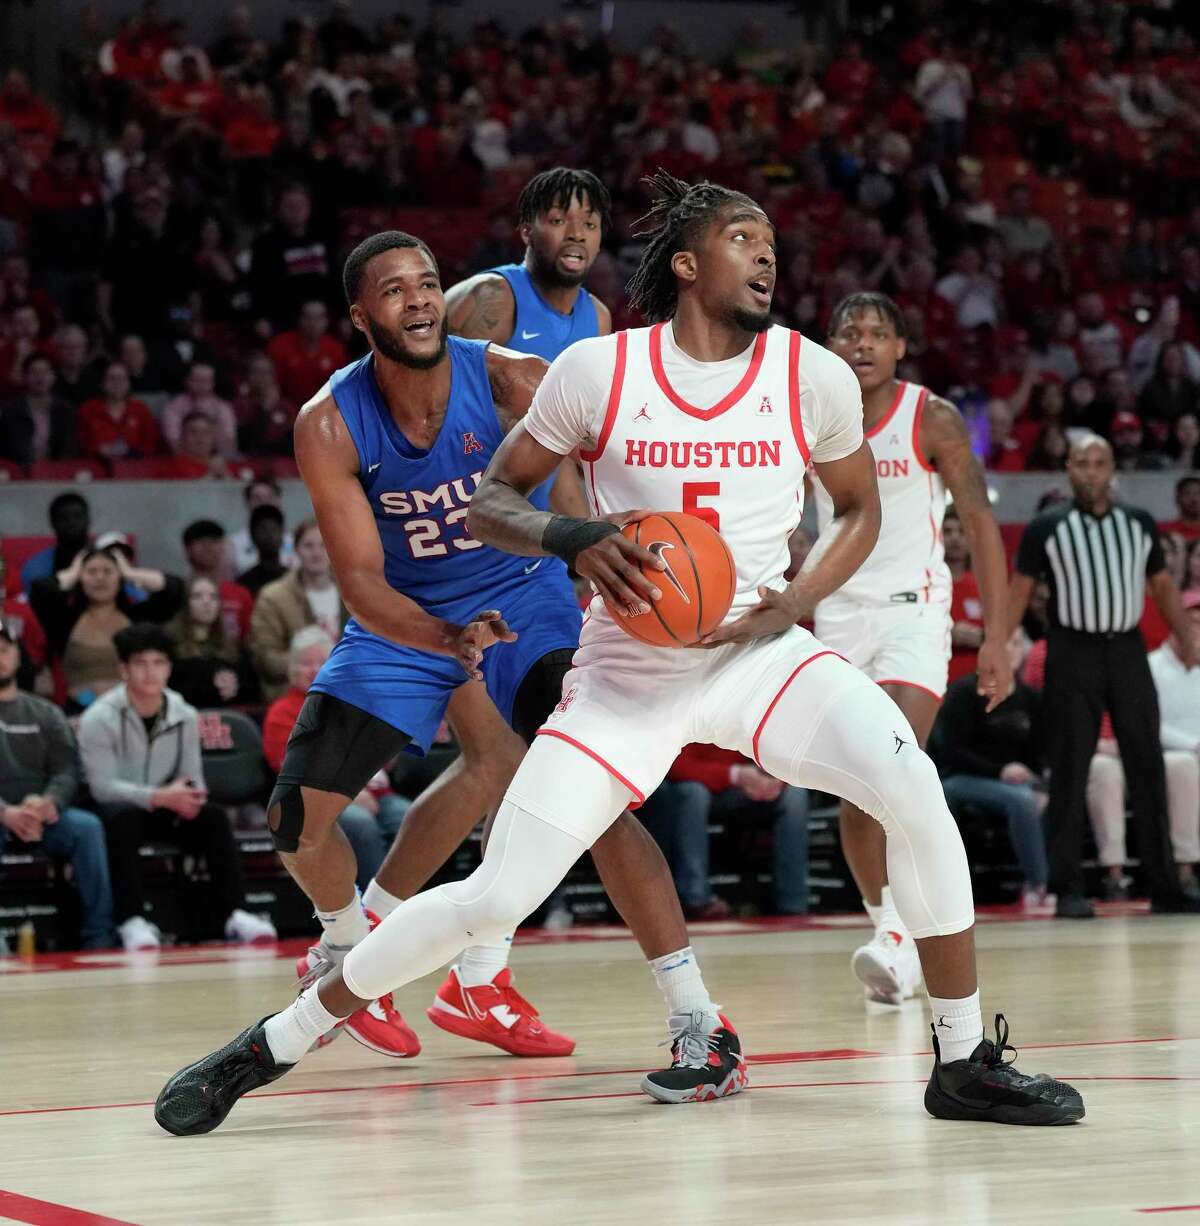 Houston Cougars forward Ja'Vier Francis (5) works against Southern Methodist Mustangs forward Efe Odigie (23) under the basket during the first half of a NCAA mens basketball game at the Fertitta Center on Thursday, Jan. 5, 2023 in Houston.